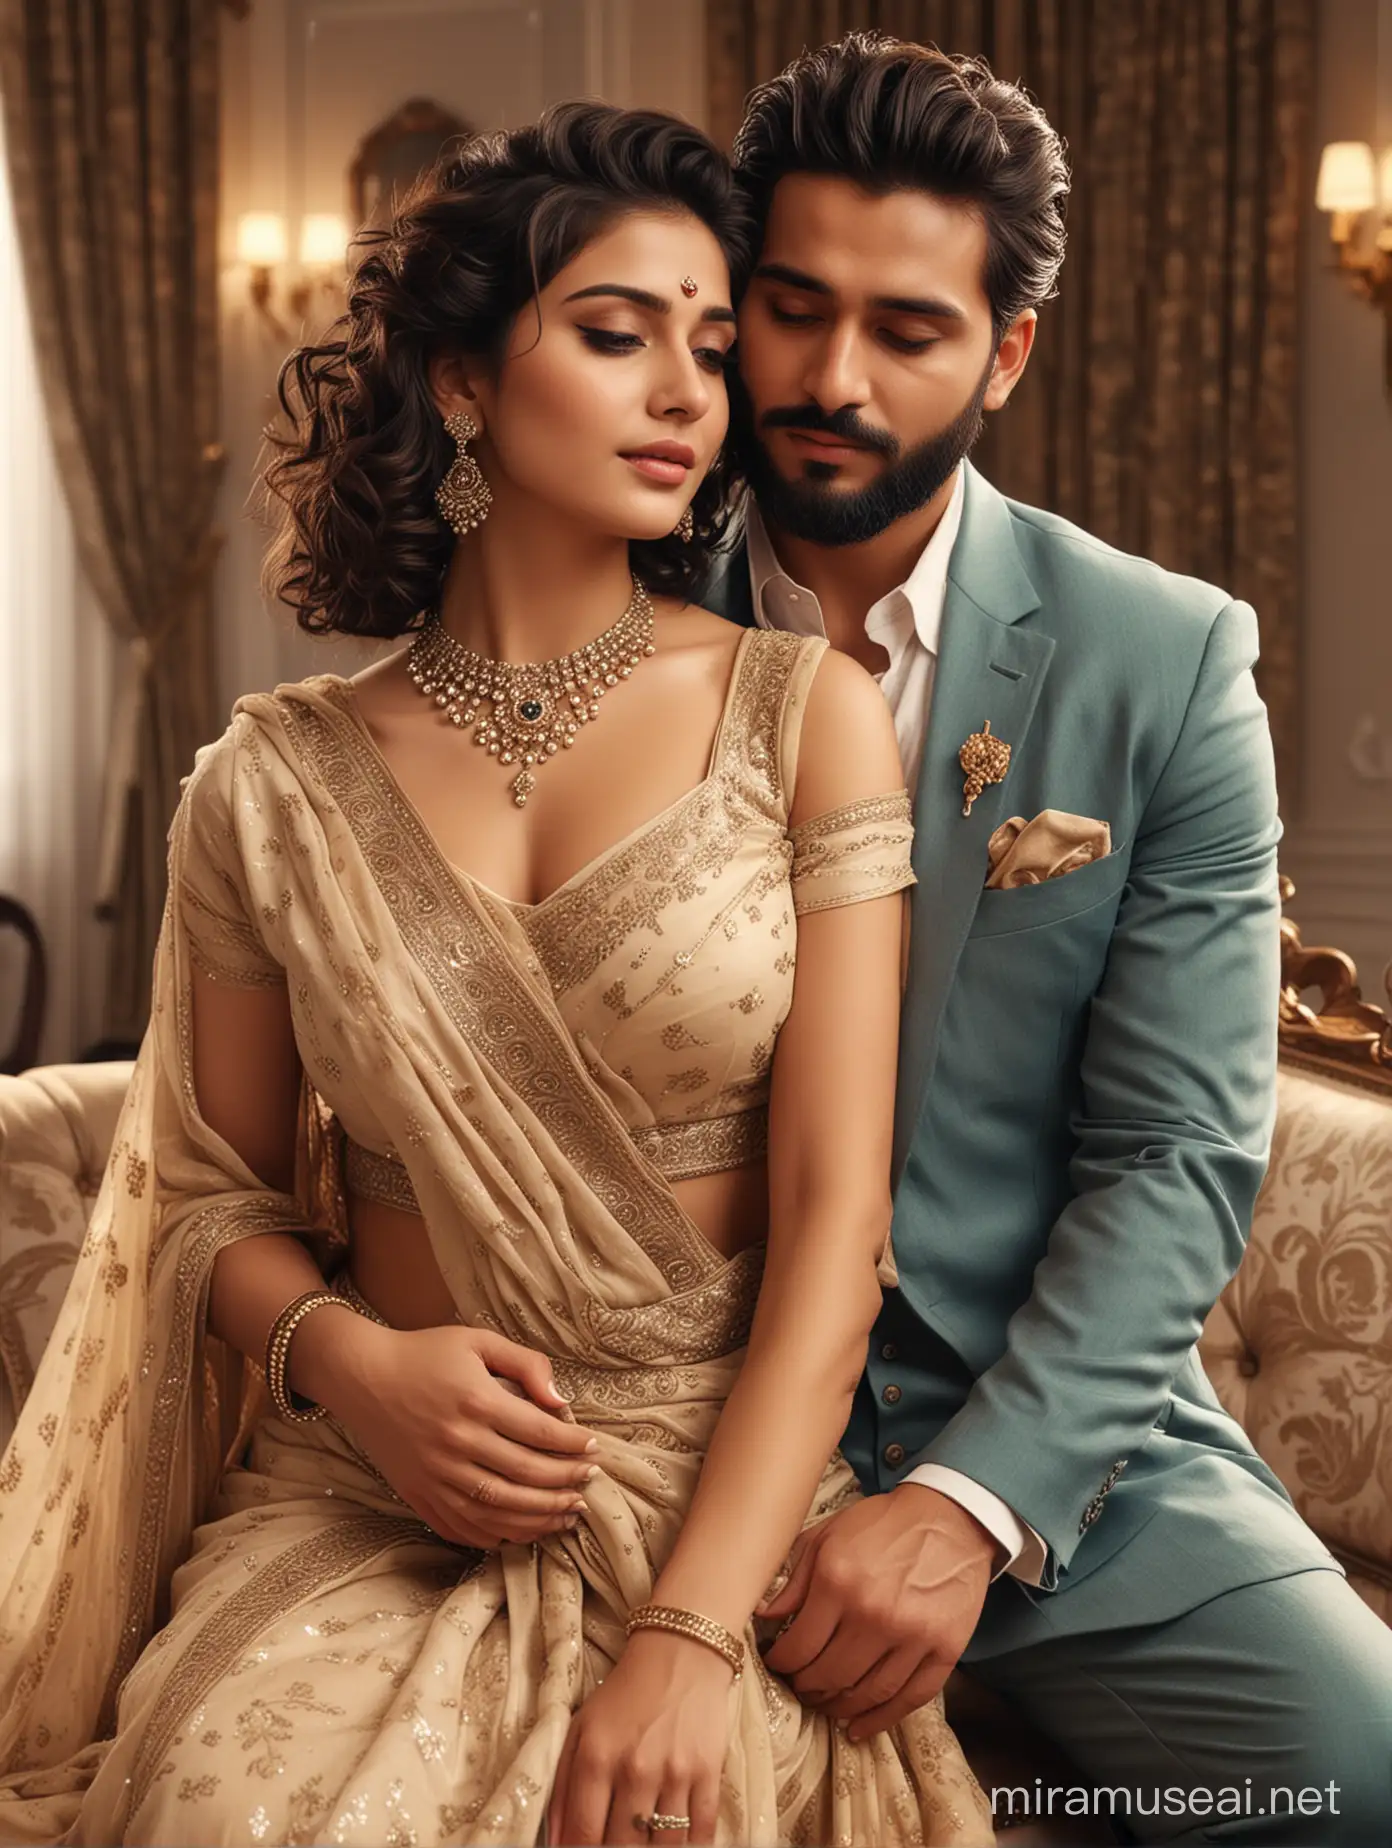 full body view  of most beautiful european couple as most beautiful indian couple, most beautiful girl in elegant bold color saree and long curly hairs, hairs tied  up with hair style stylishly, necklace,   big wide black  eyes, full face, makeup, low cut neck, SLEEVLESS, LOW CUT BACK, girl embracing with emotion and possessive feeling, pressing face to chest of man, emotional crying with longing feeling, innocence and ecstasy, hands around man neck, man comforting her,  man with stylish beard, perfect SHORT  hair cut, formals, photo realistic, 4k.
background, spacious modern elite photo room, with luxury sofa set, cream color carpfull body view  of most beautiful european couple as most beautiful indian couple, most beautiful girl in elegant bold color saree and long curly hairs, hairs tied  up with hair style stylishly, necklace,   big wide black  eyes, full face, makeup, low cut neck, SLEEVLESS, DEEP CUT NECK AND BACK, girl embracing with emotion and possessive feeling, pressing face to chest of man, emotional crying with longing feeling, innocence and ecstasy, hands around man neck, man comforting her,  man with stylish beard, perfect SHORT  hair cut, formals, photo realistic, 4k.
background, spacious modern elite photo room, with luxury sofa set, cream color carpet, elegant interior designs, vintage lamps, romantic reunion ambience, photorealistic, vibrant colors, intricate details, 8k.et, elegant interior designs, vintage lamps, romantic reunion ambience, photorealistic, vibrant colors, intricate details, 8k.